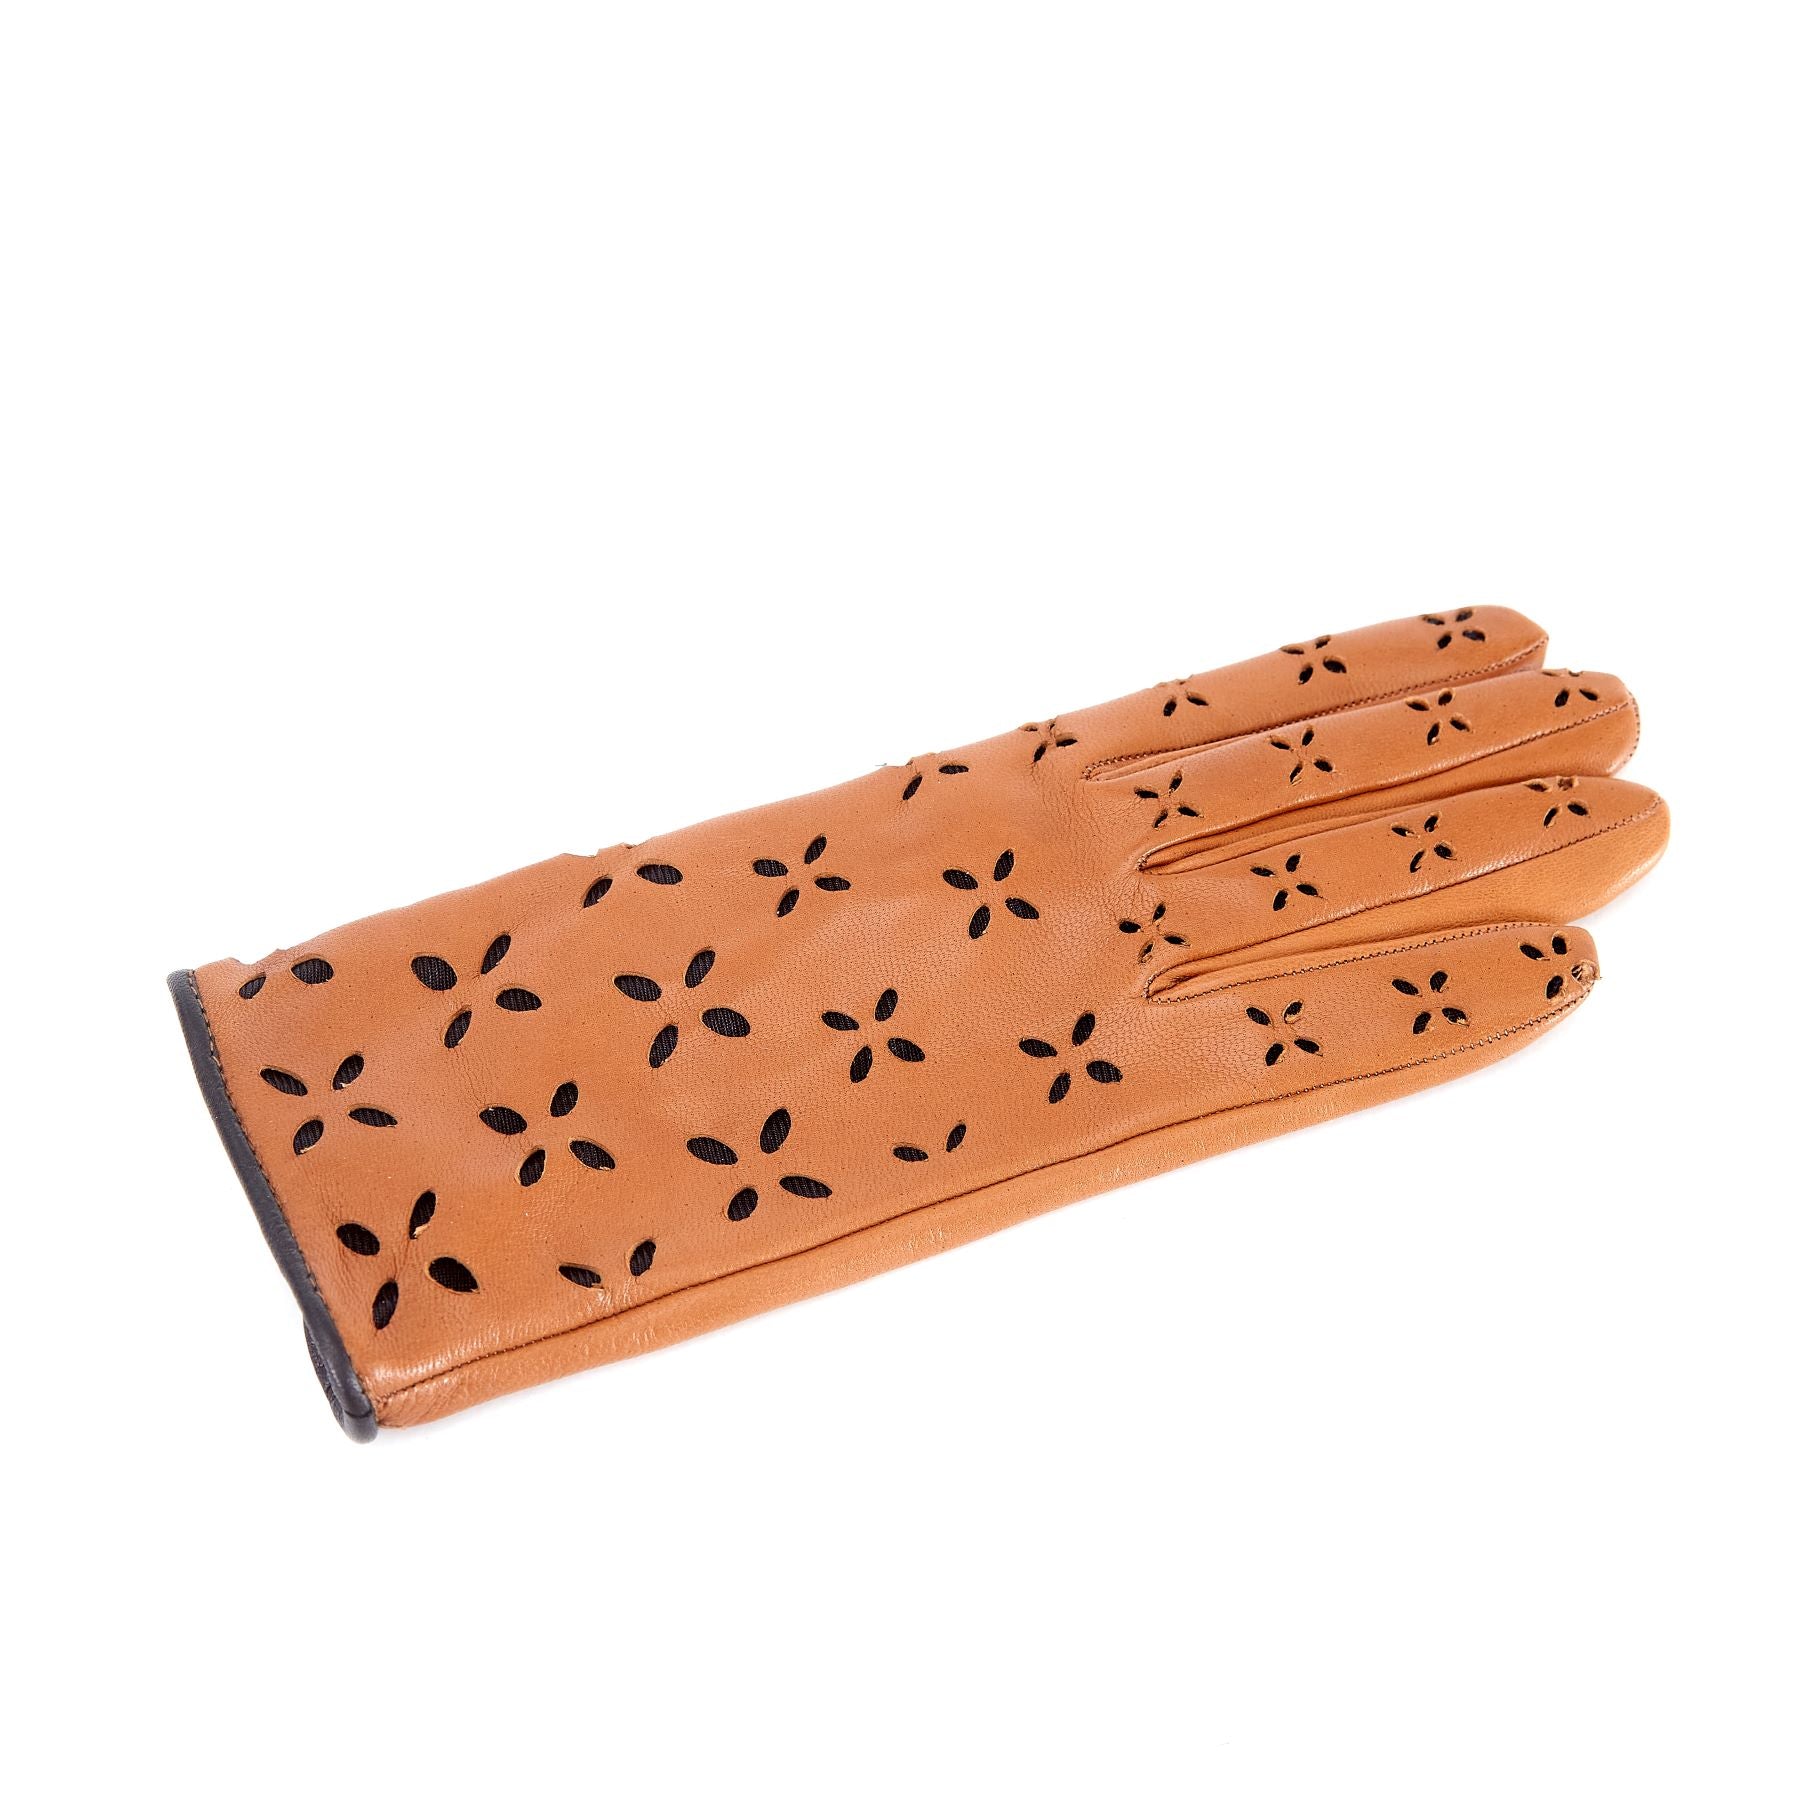 Women's camel nappa leather gloves with laser cut petals detail and polyamide lining